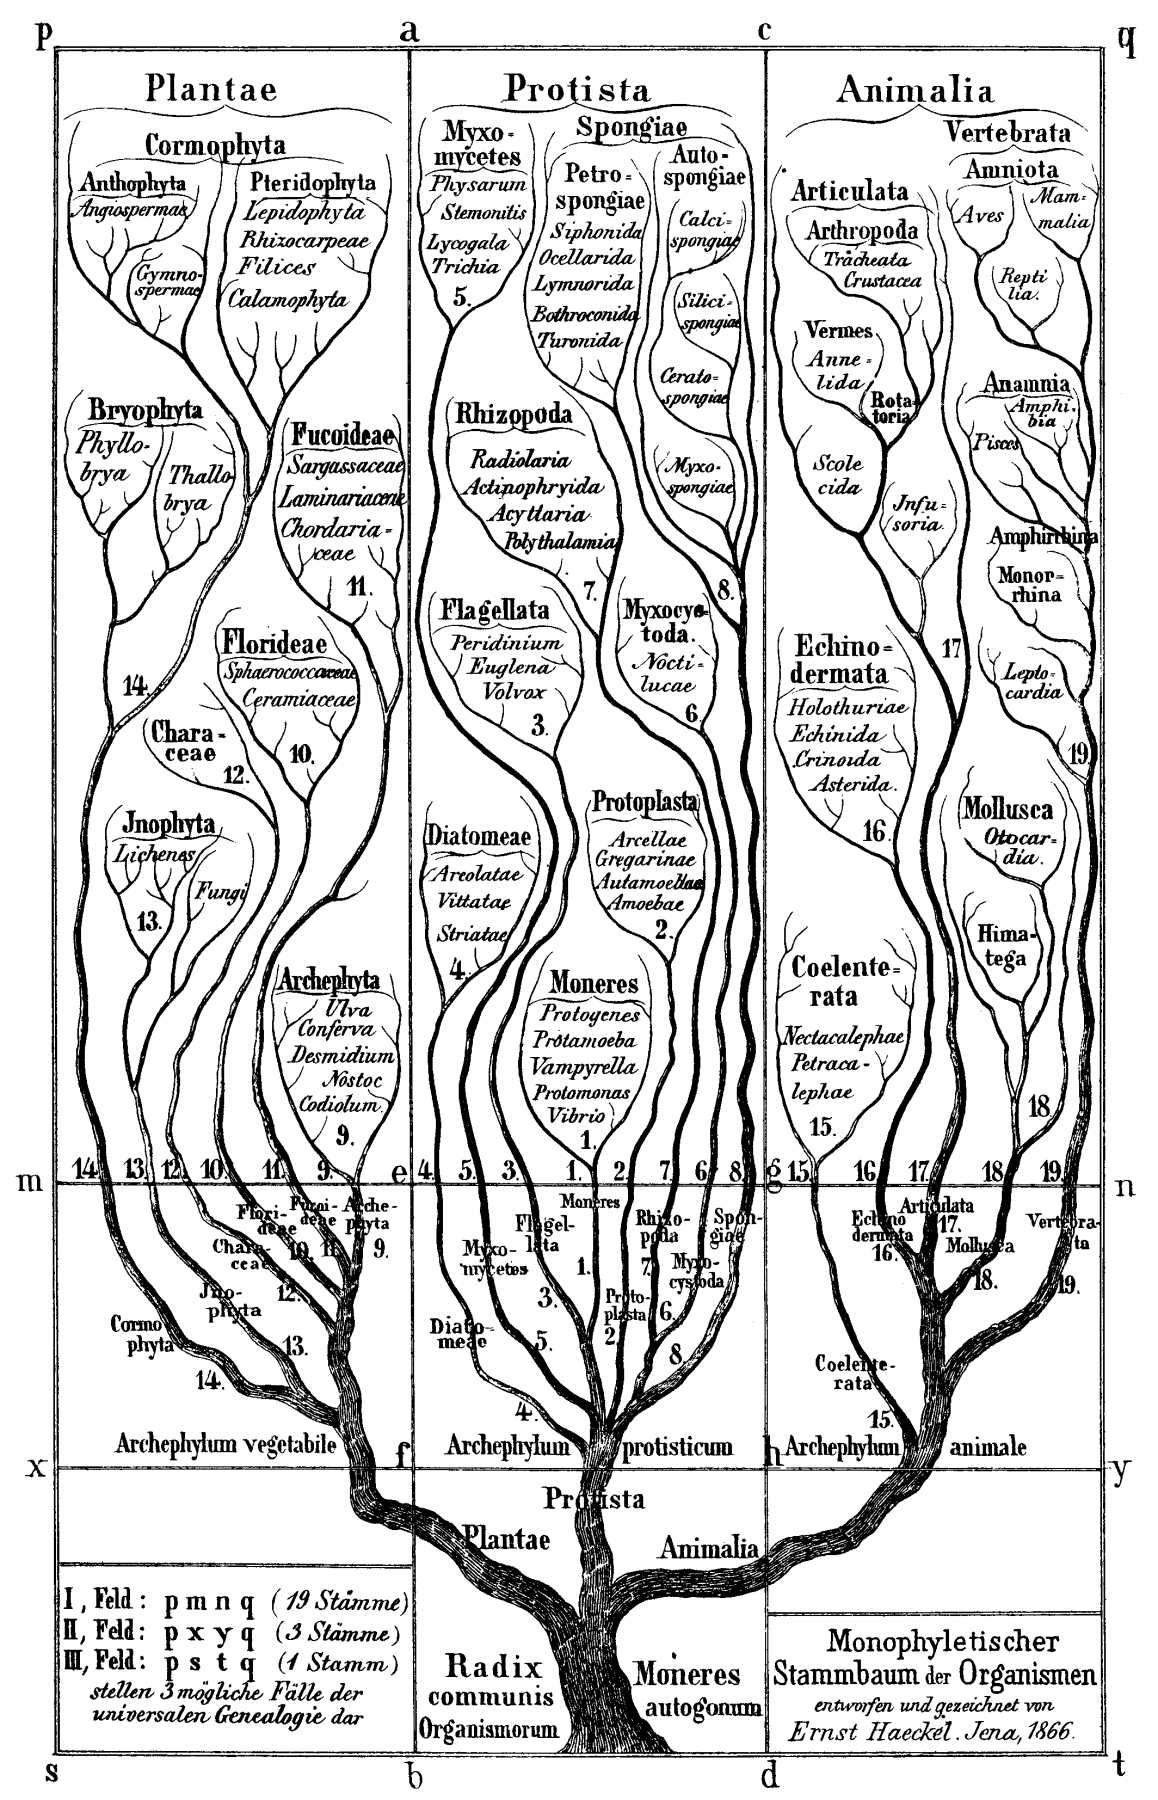 Old illustration of a branching tree with scientific labels, representing various orders of organism classifications. Title: Monophyletischer Stammbaum der Organismens.